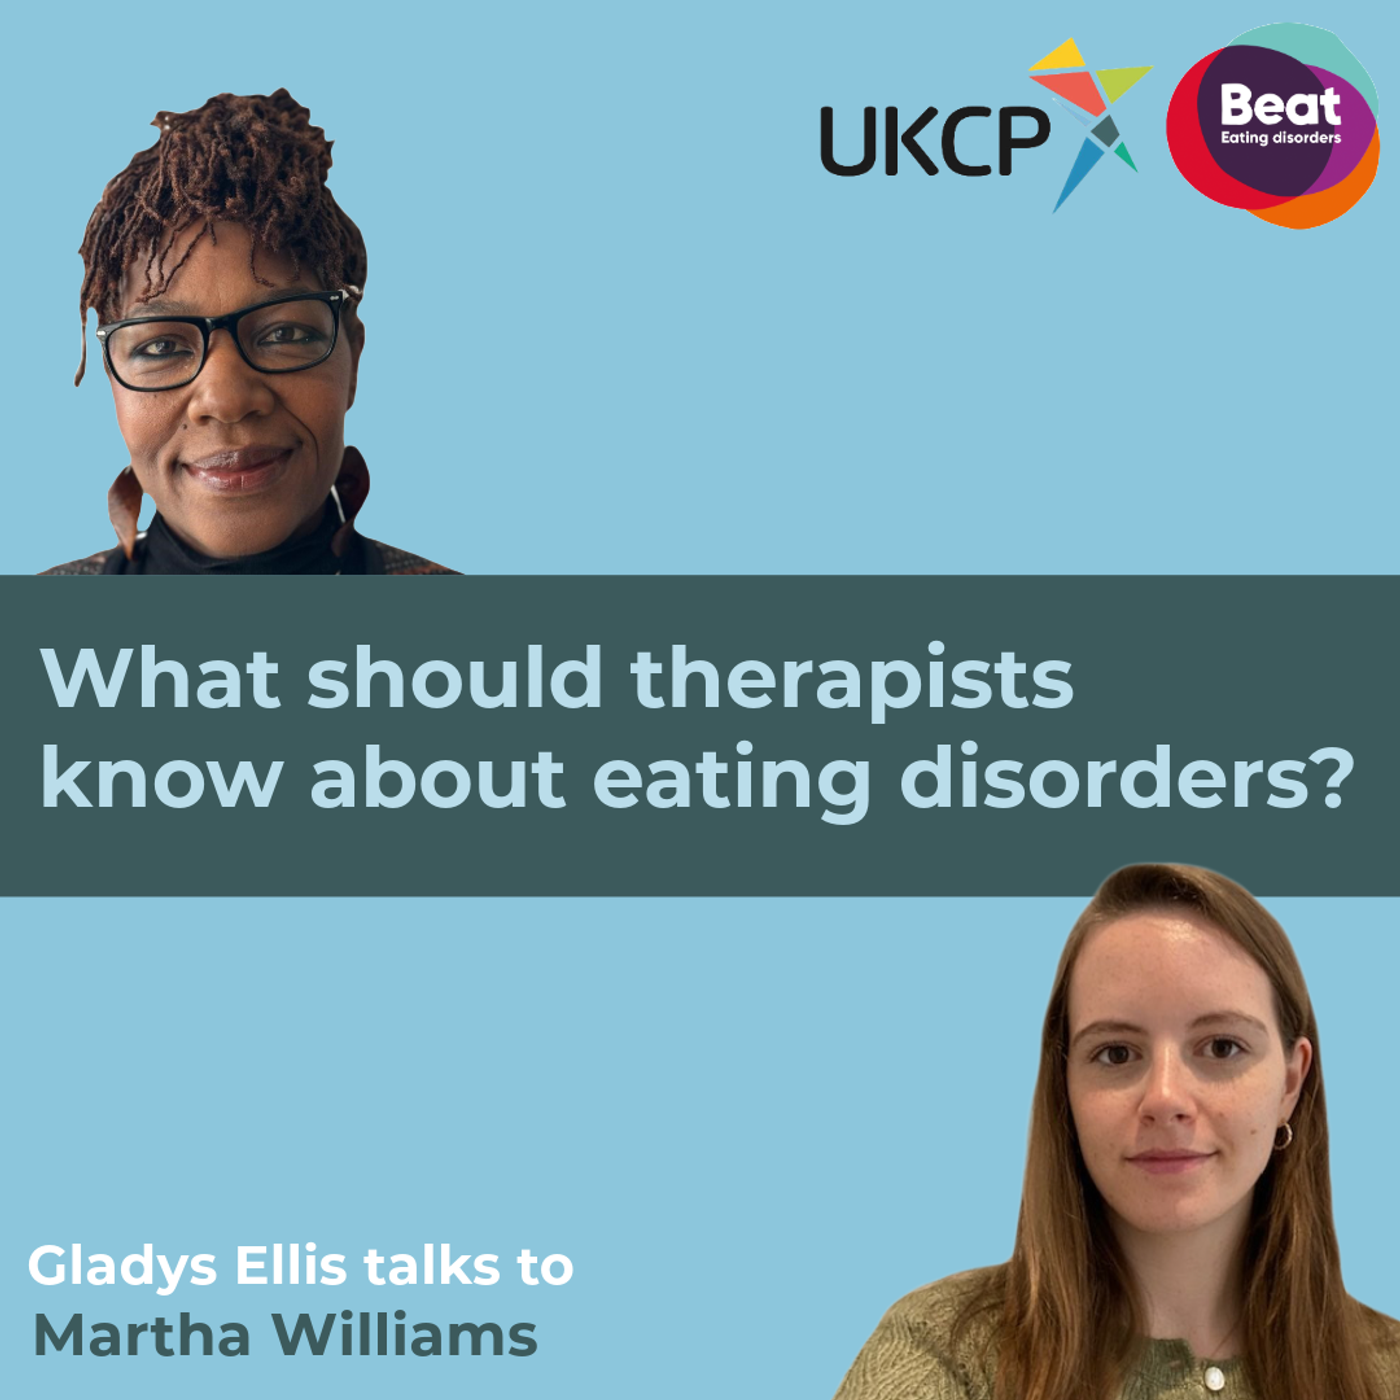 What should therapists know about eating disorders?